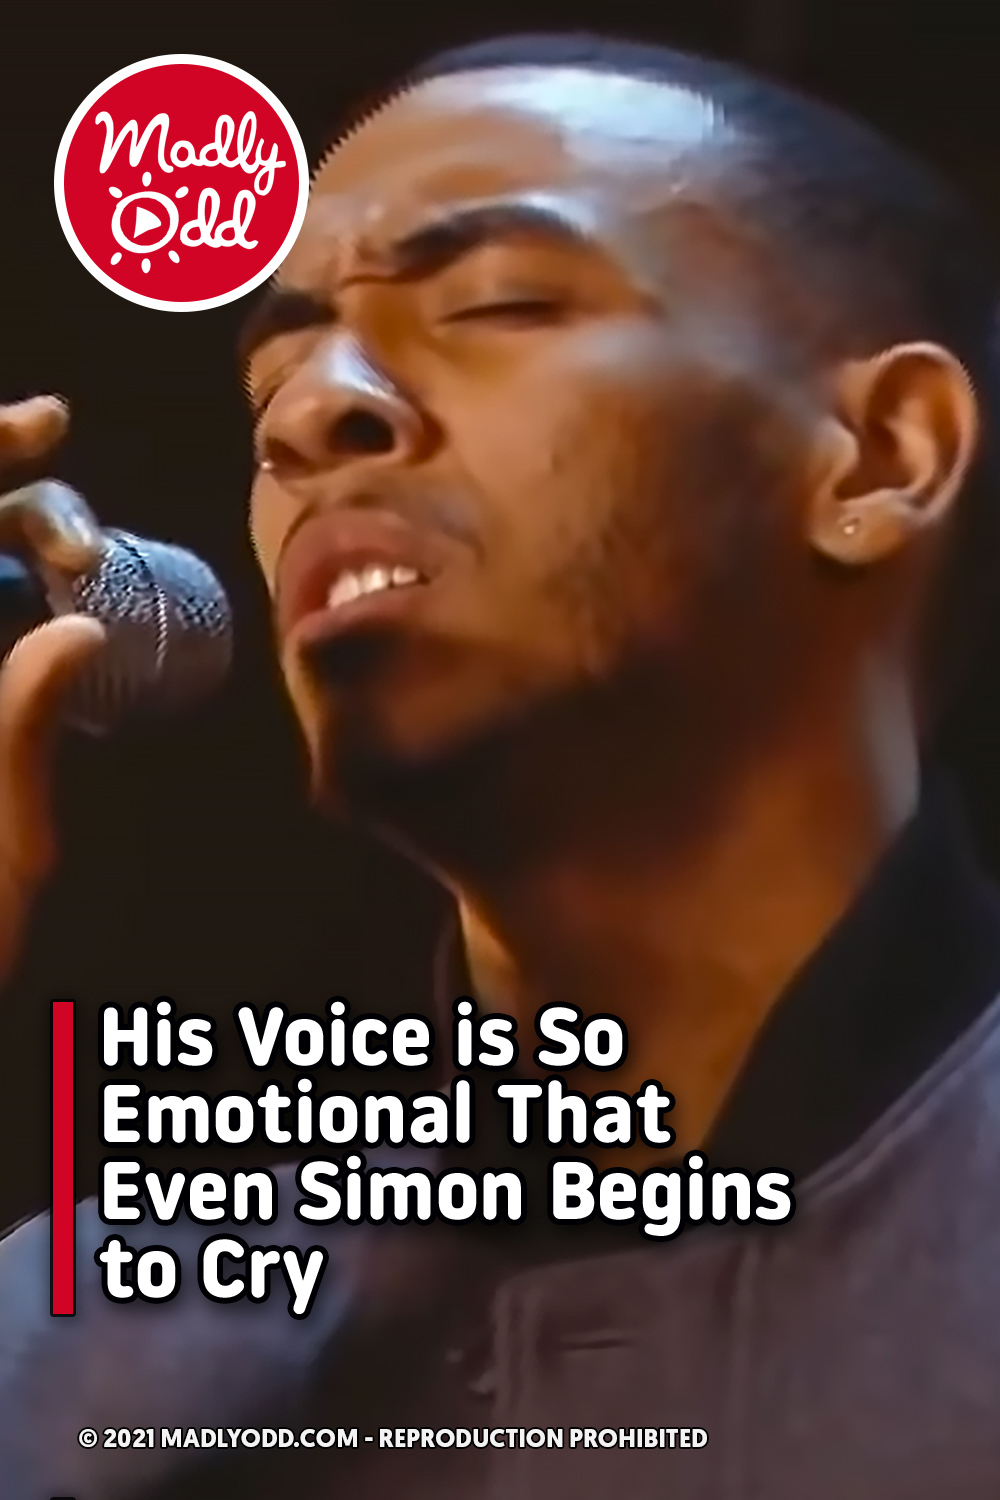 His Voice is So Emotional That Even Simon Begins to Cry